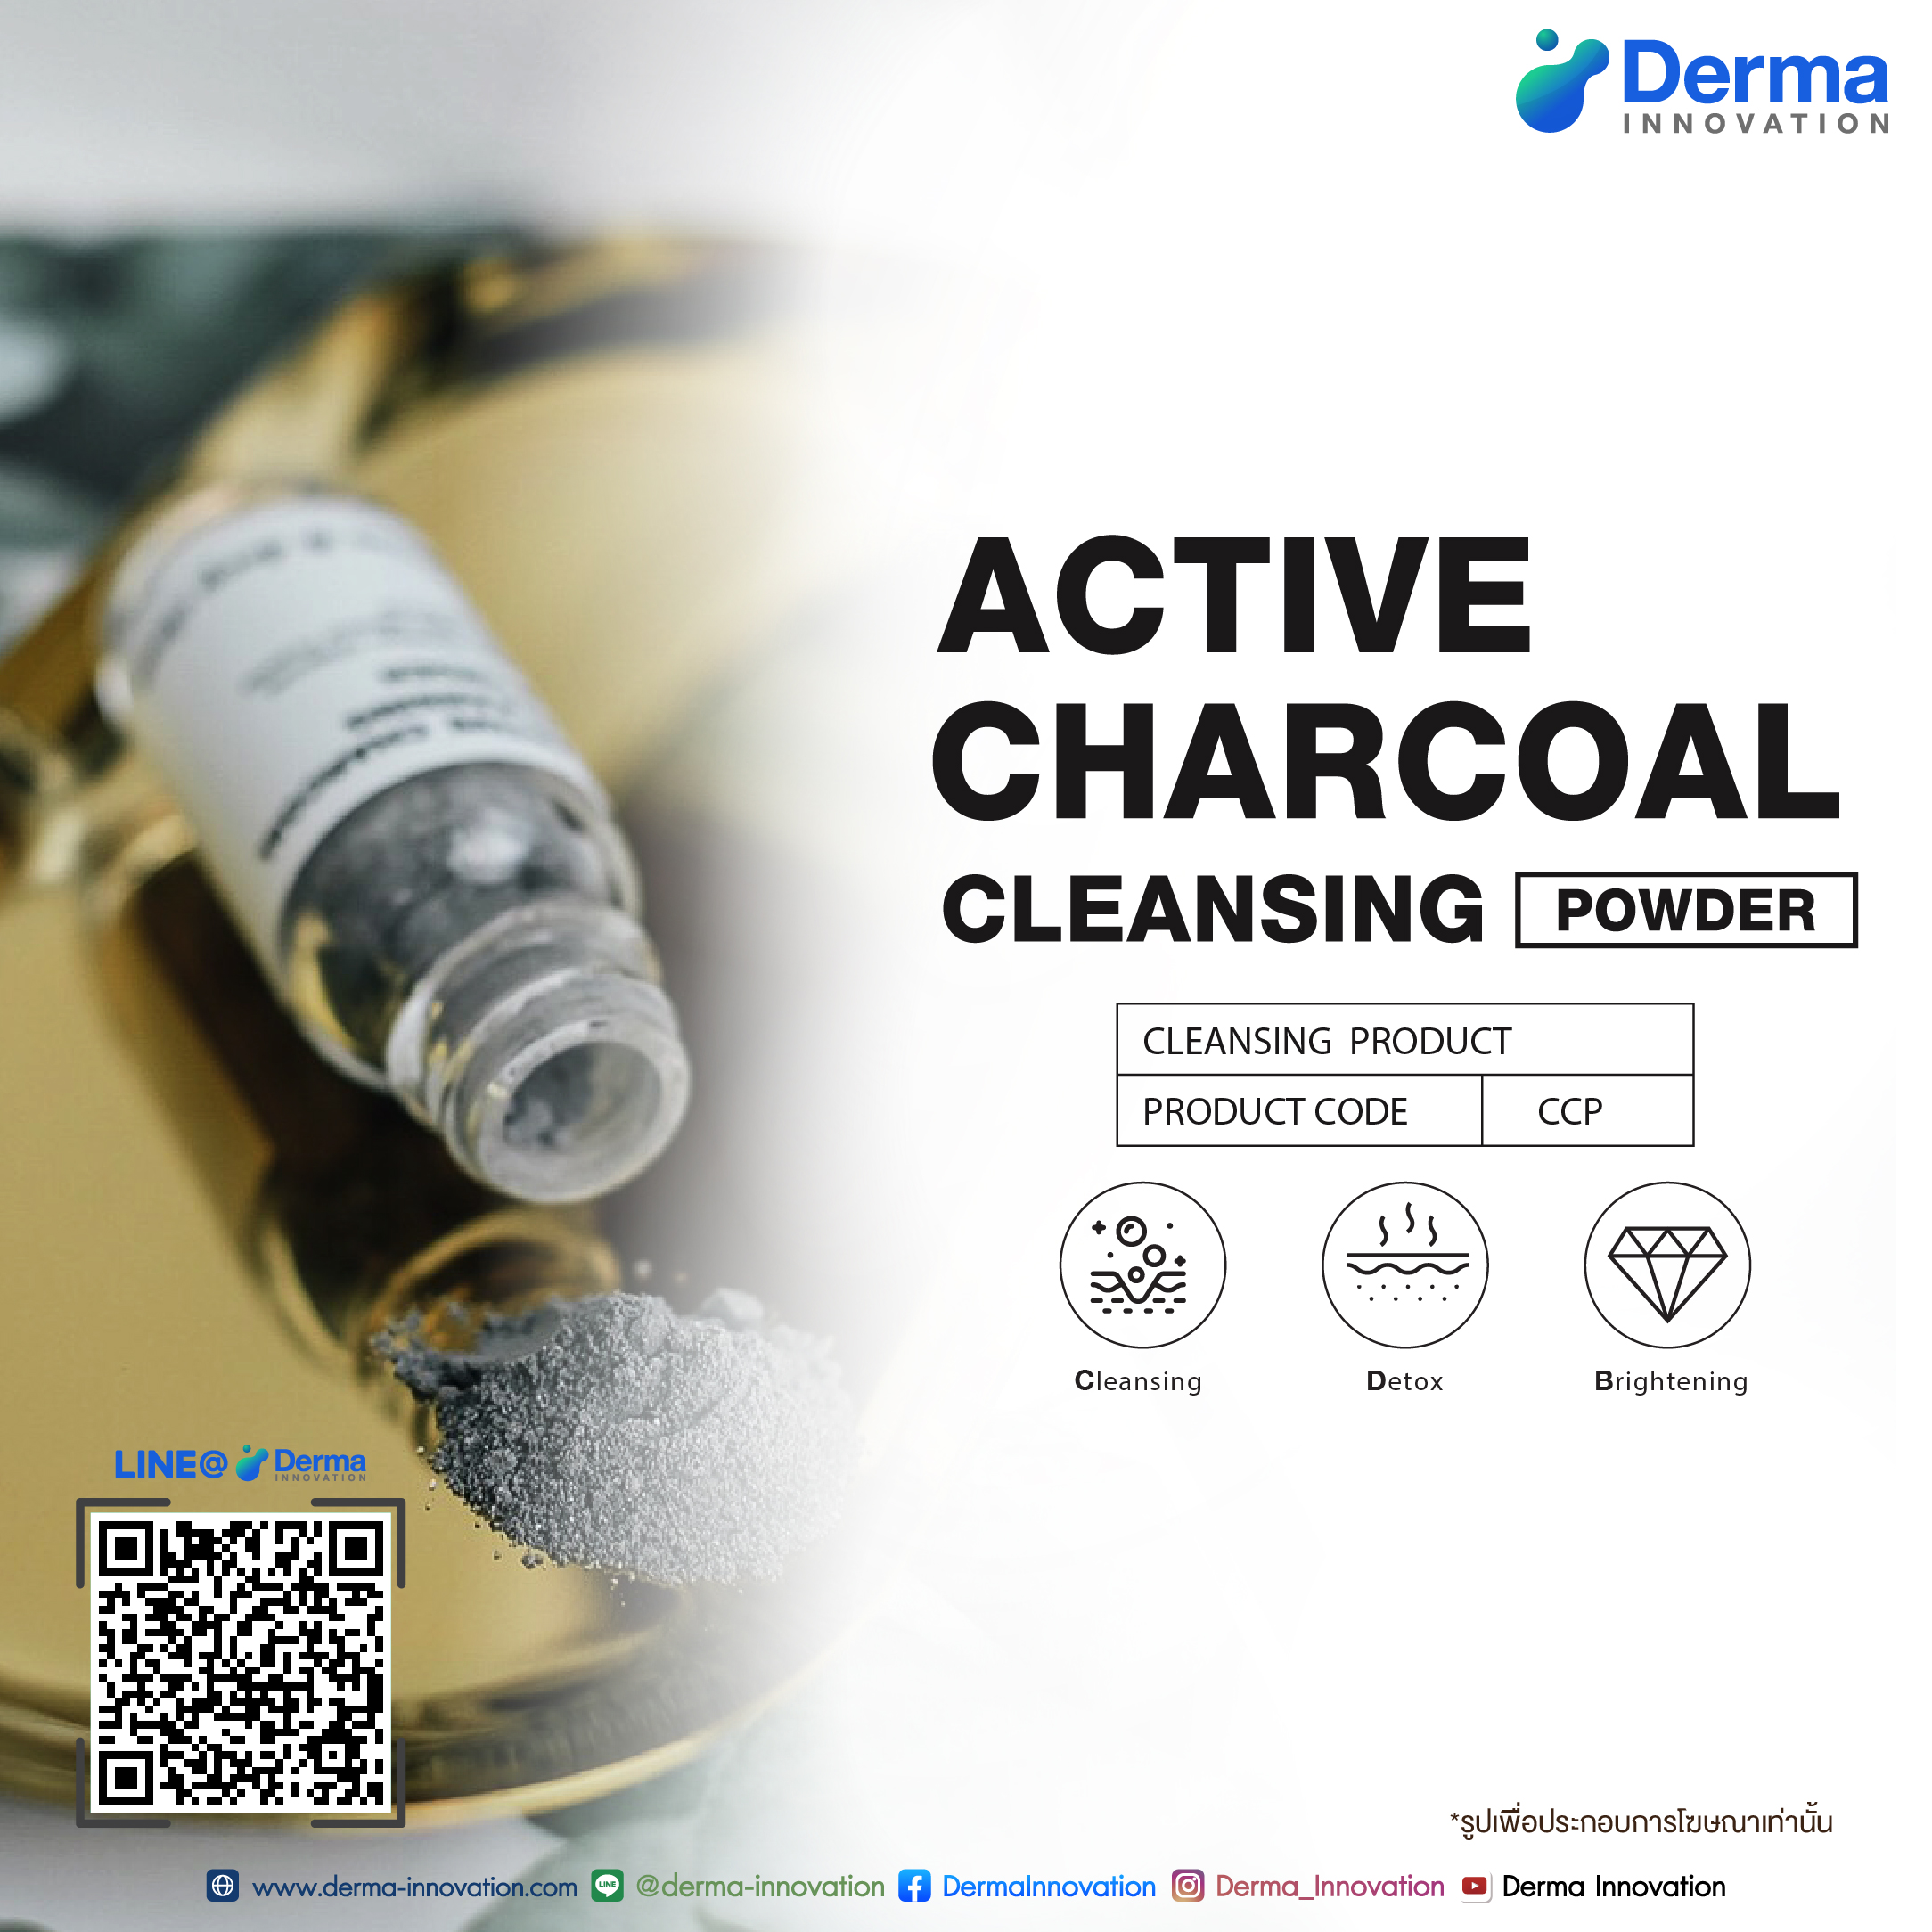 Active Charcoal Cleansing Powder